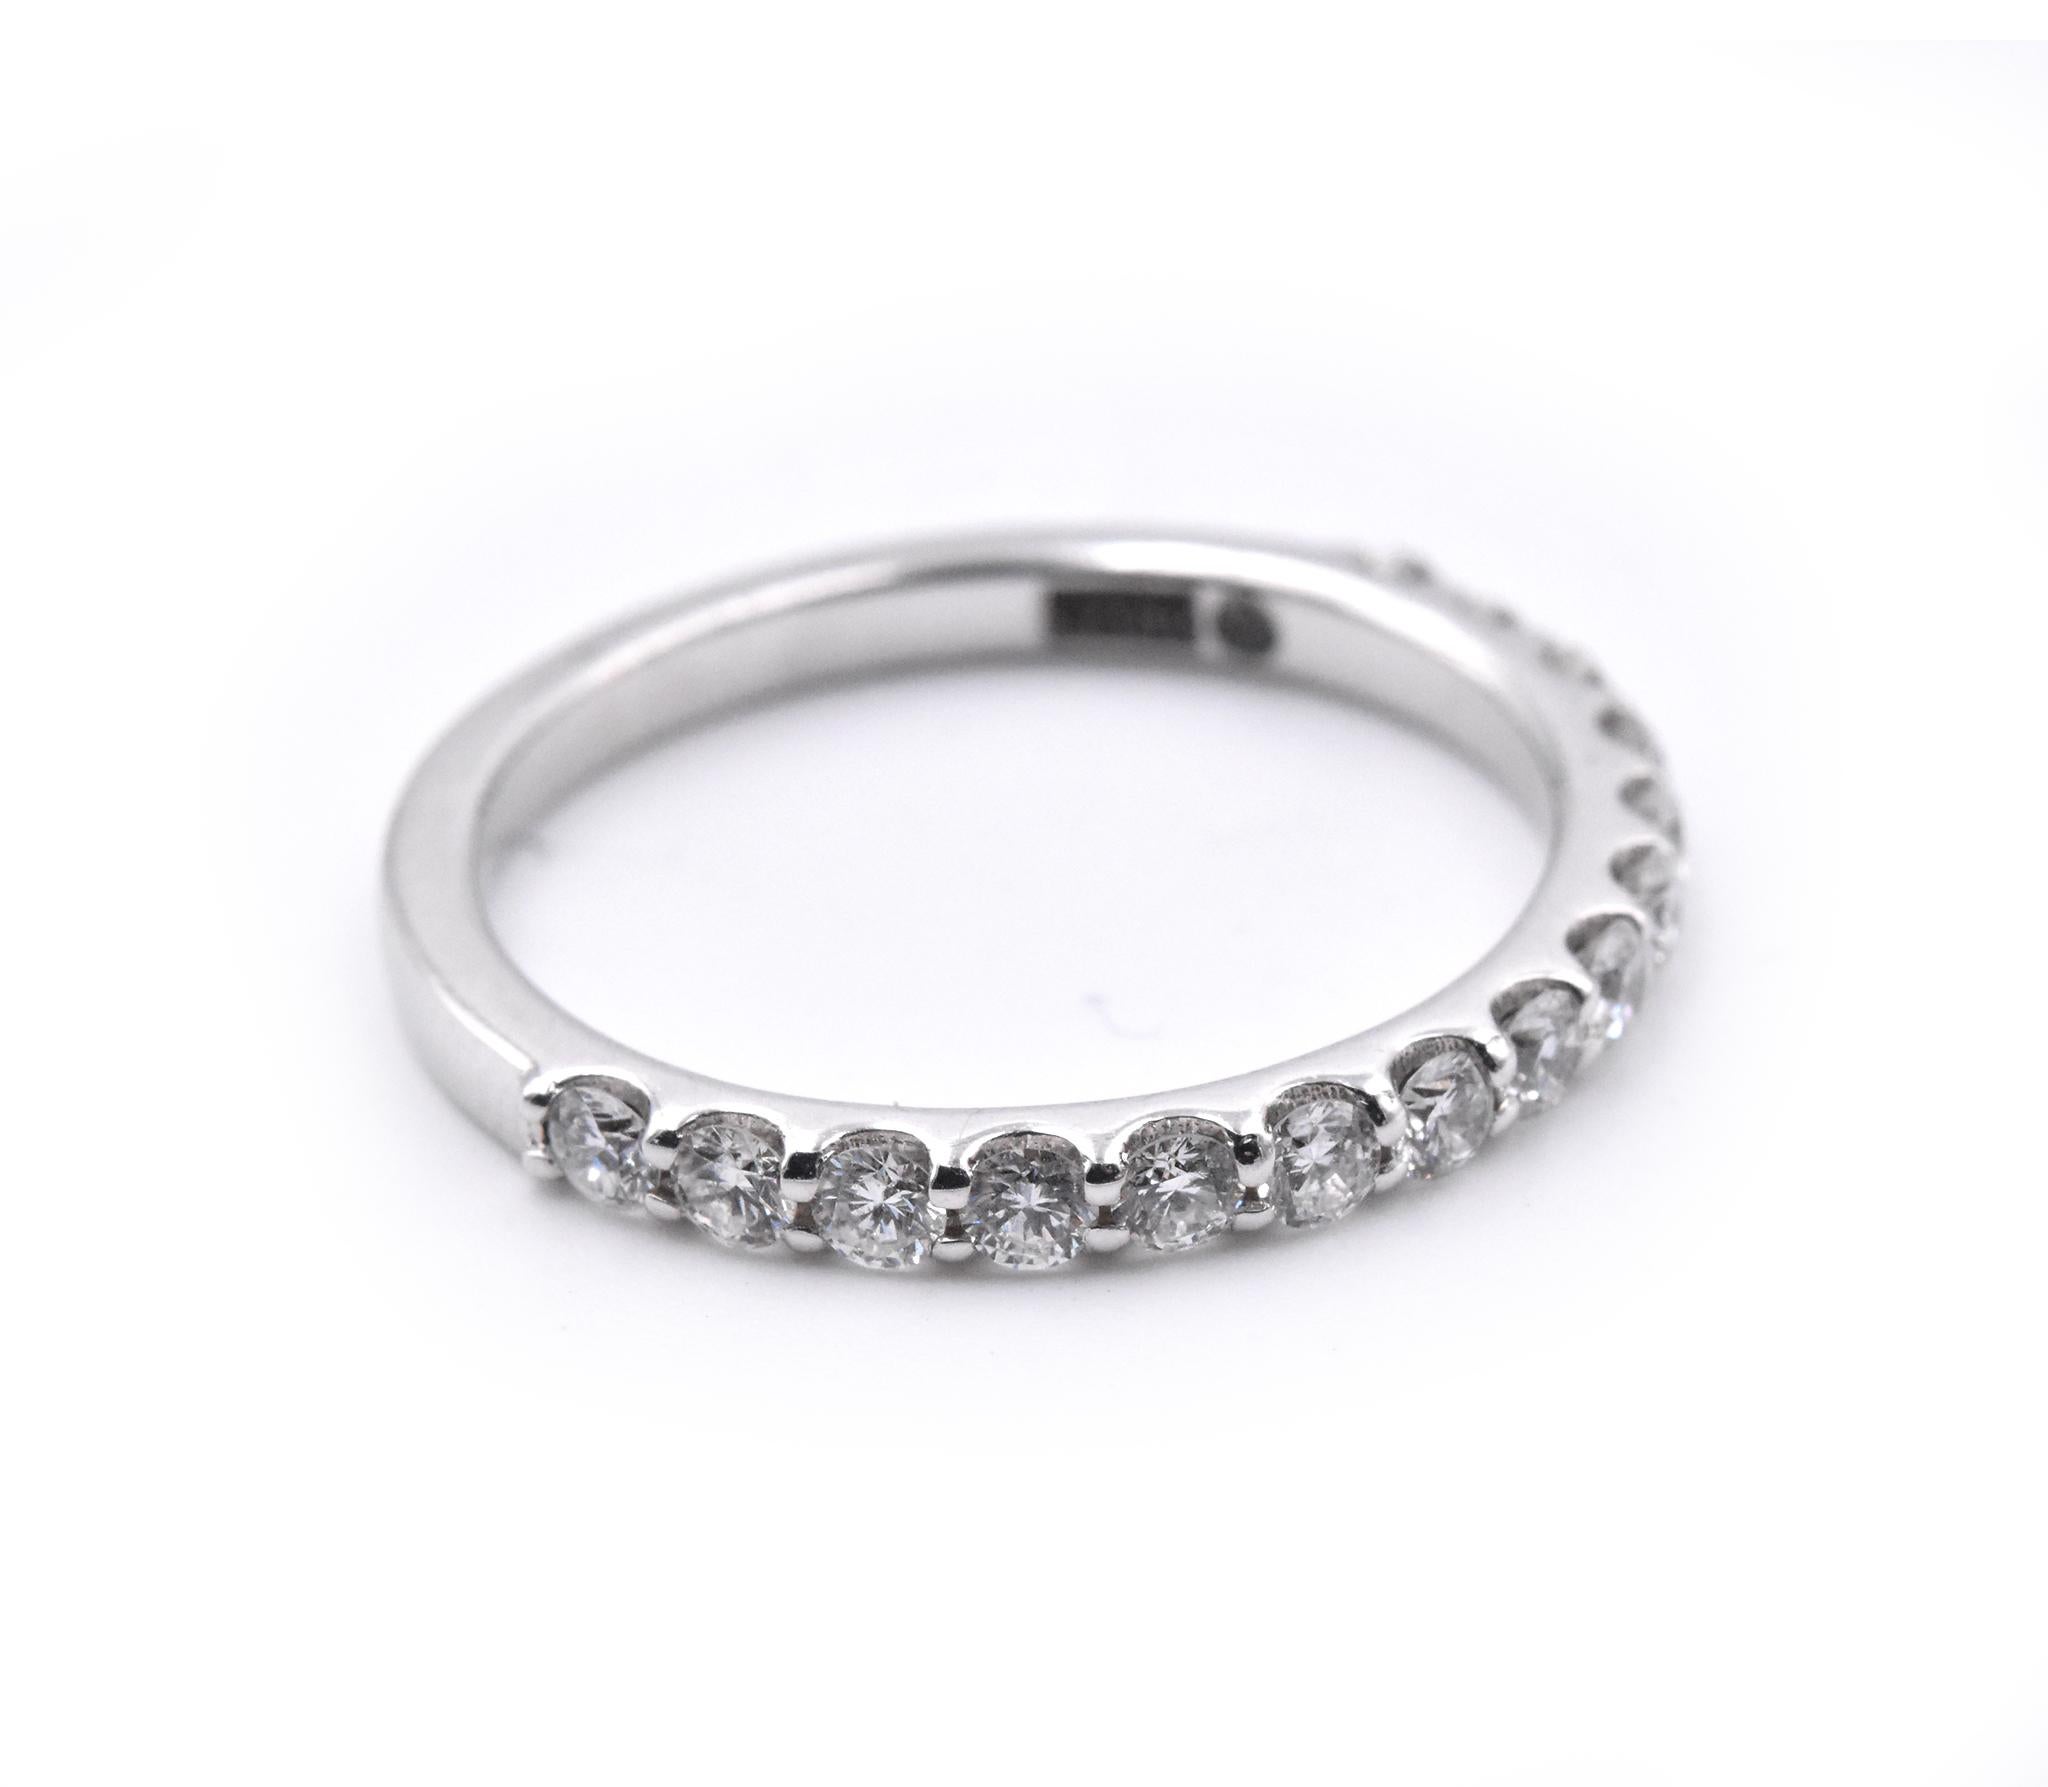 Designer: custom
Material: 14k white gold
Diamonds: 15 round brilliant cuts = 0.55cttw
Size: 6 ¾ (please allow two additional shipping days for sizing requests)  
Dimensions: ring measures 1.95mm in width
Weight: 2.20 grams
